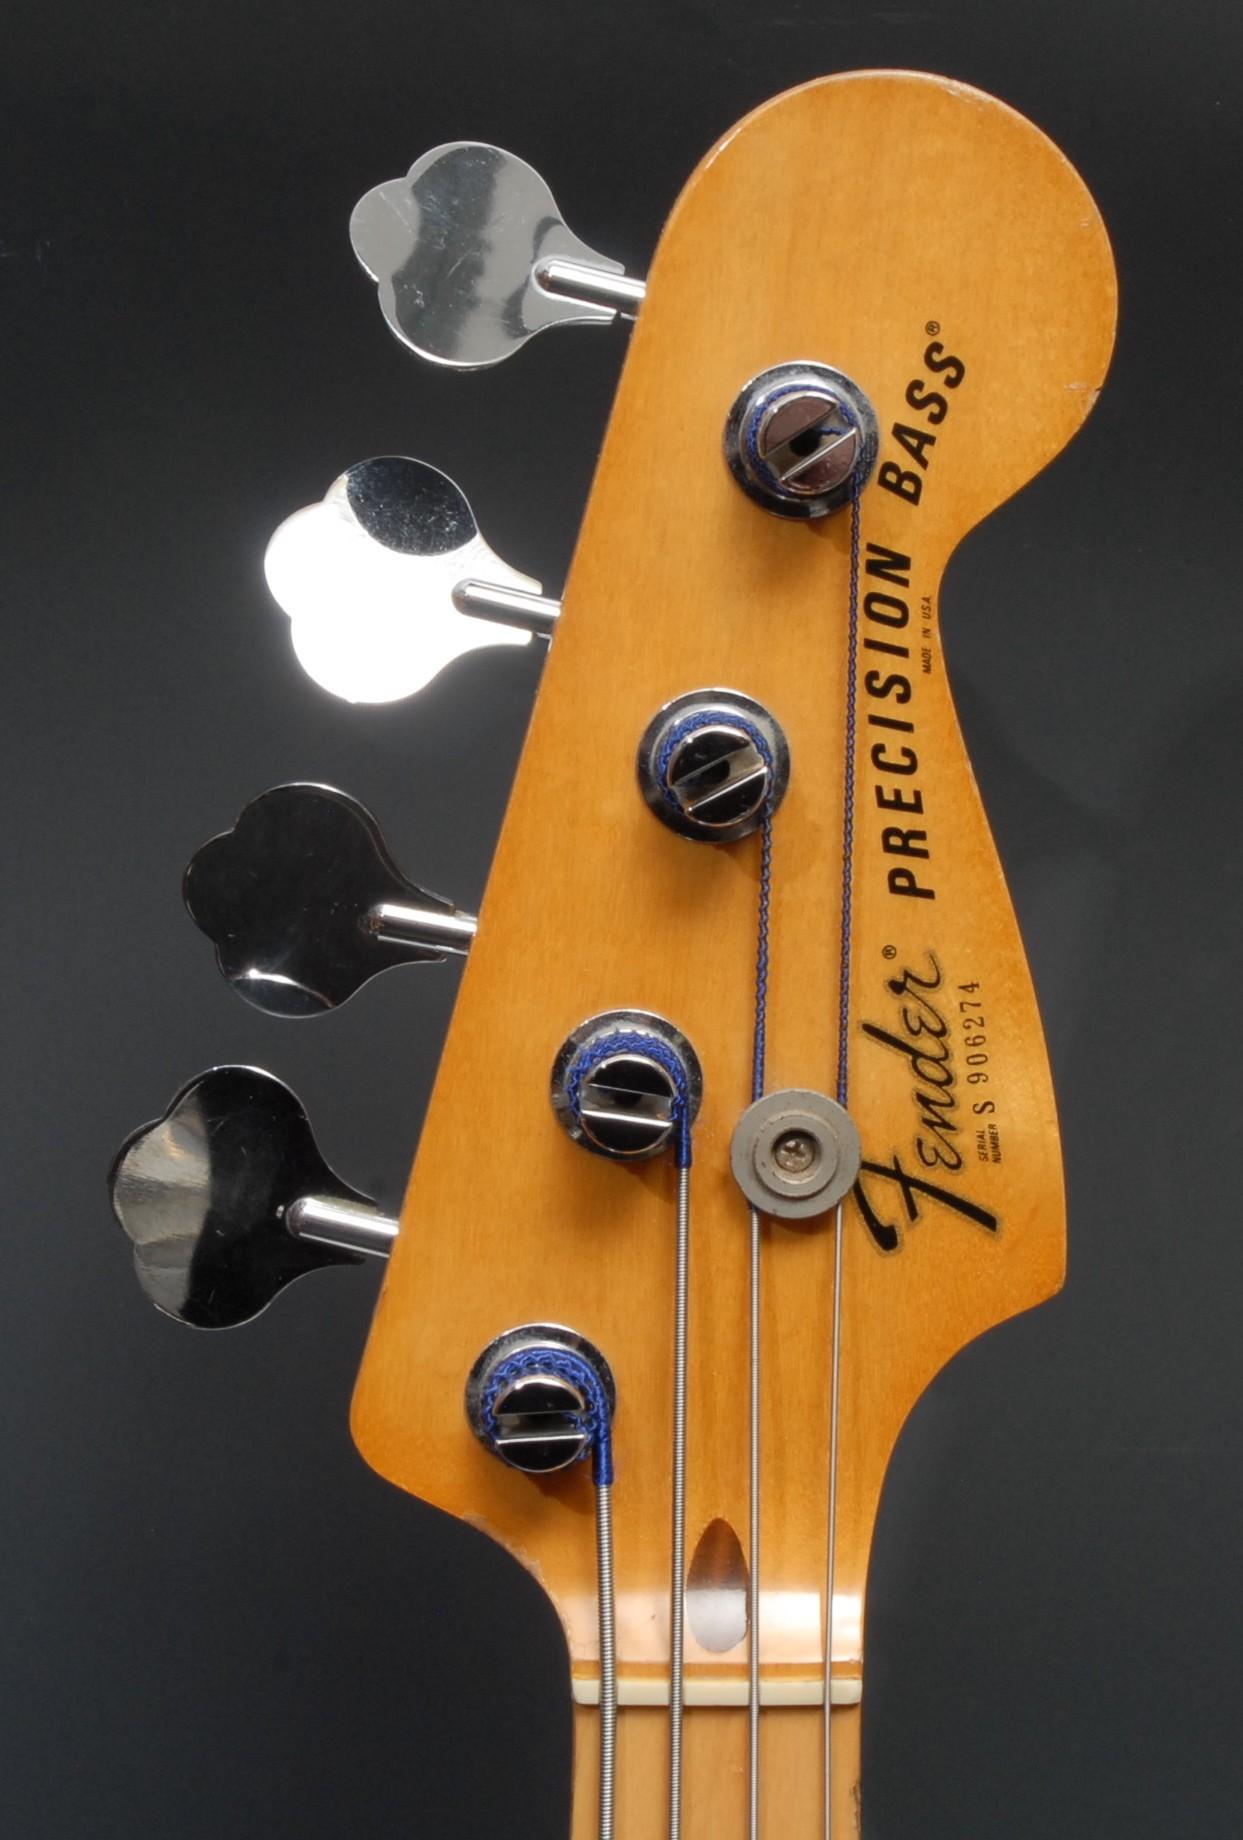 A Fender Precision electric bass guitar USA, natural wood body, maple neck, black pickguard. - Image 4 of 16